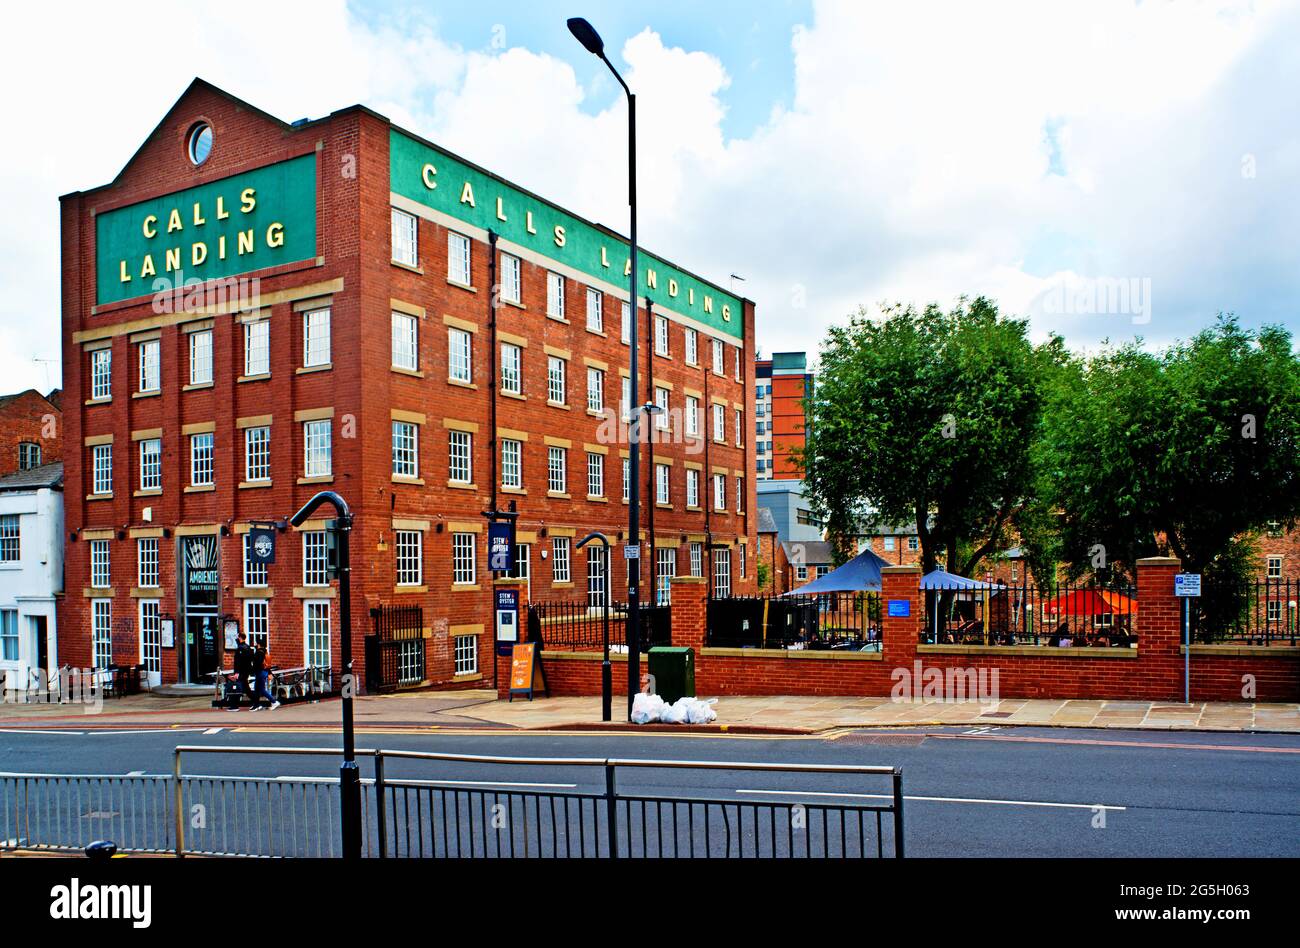 The Stew and Oyster Pub, Calls Landing, Leeds, England Stock Photo